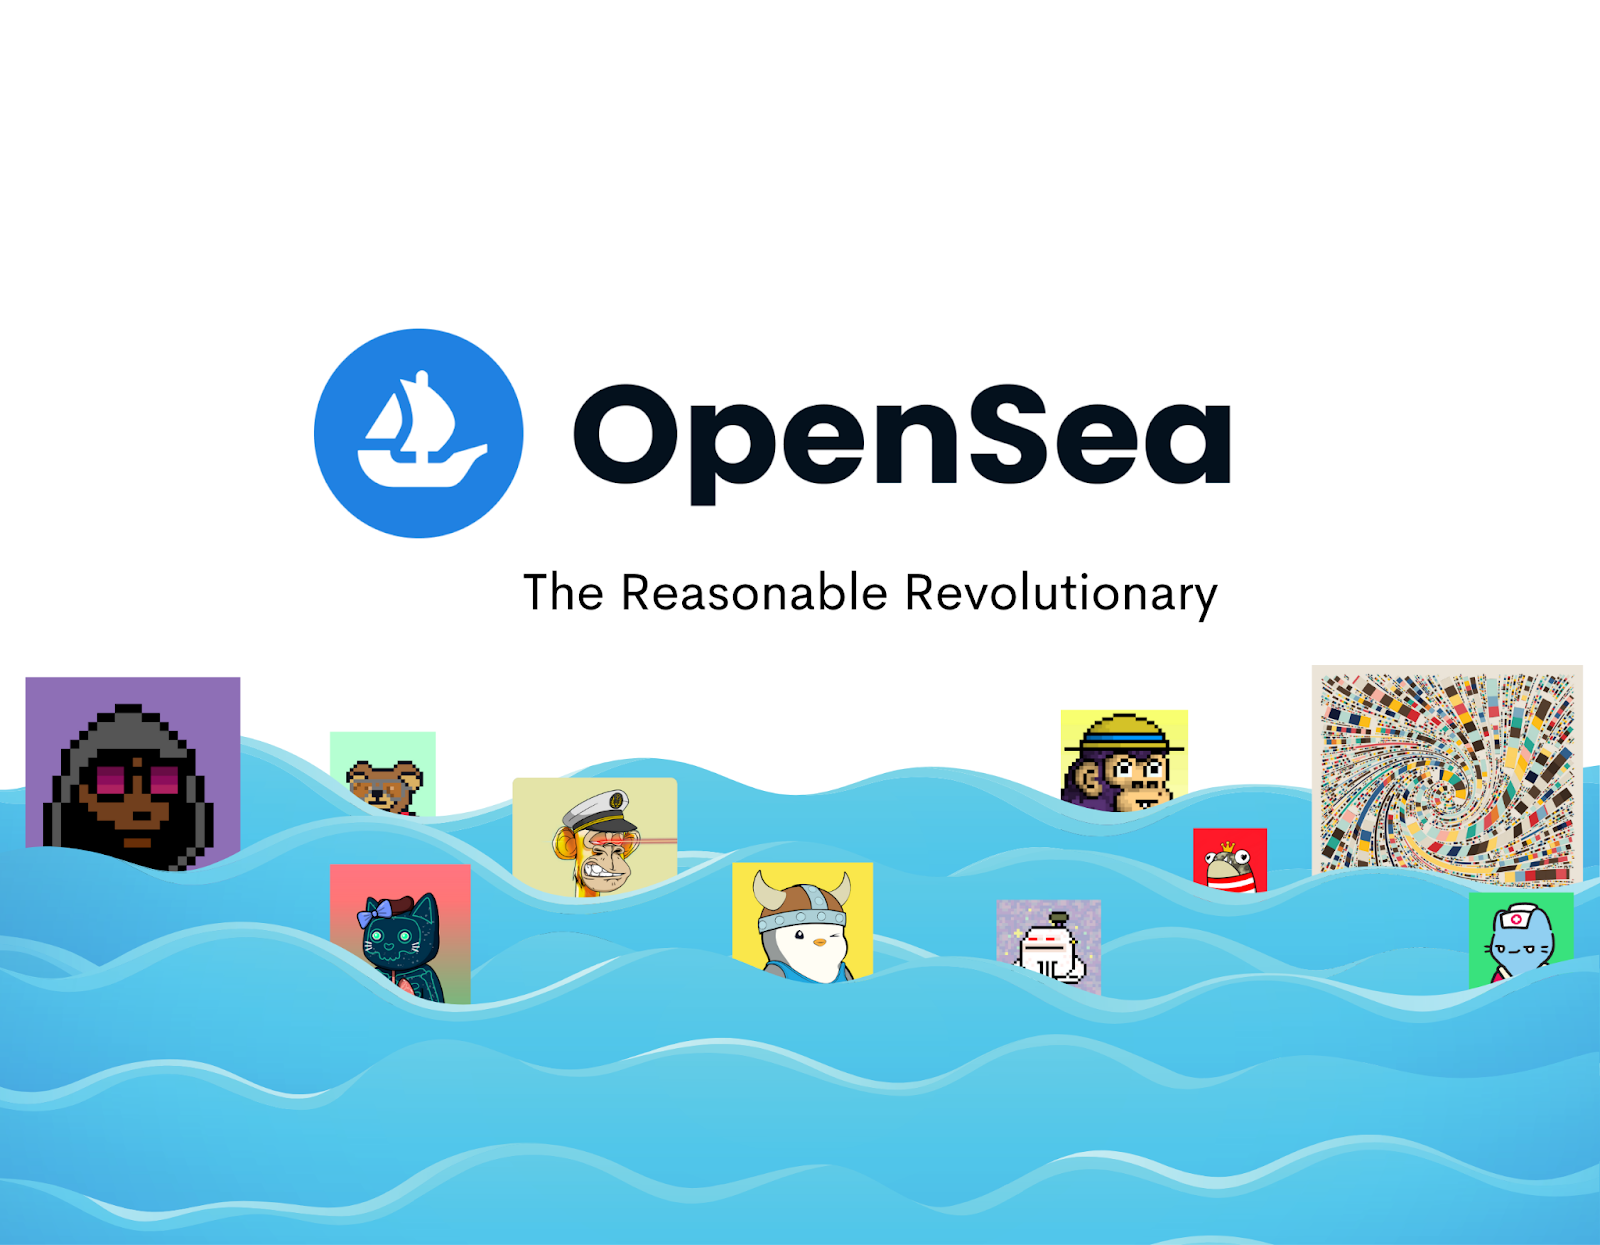 OpenSea makes it easier for anyone to mint NFTs with its 'no-code hub